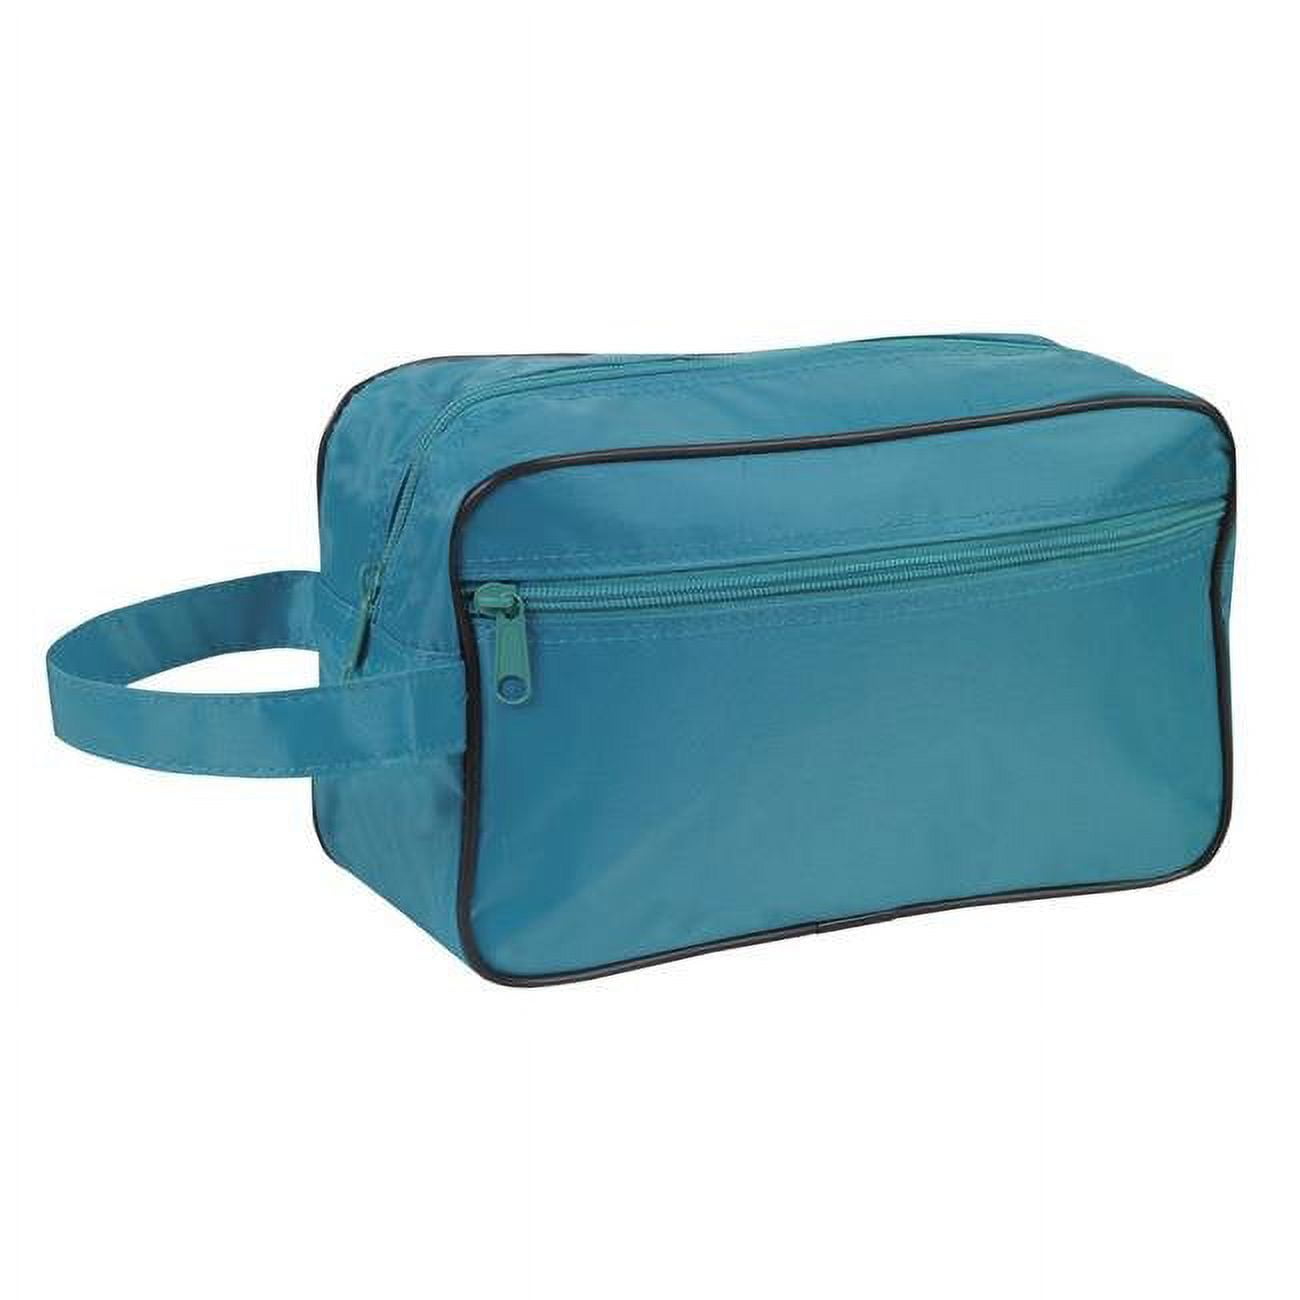 2334104 Toiletry Travel Bag - Teal, Case Of 100